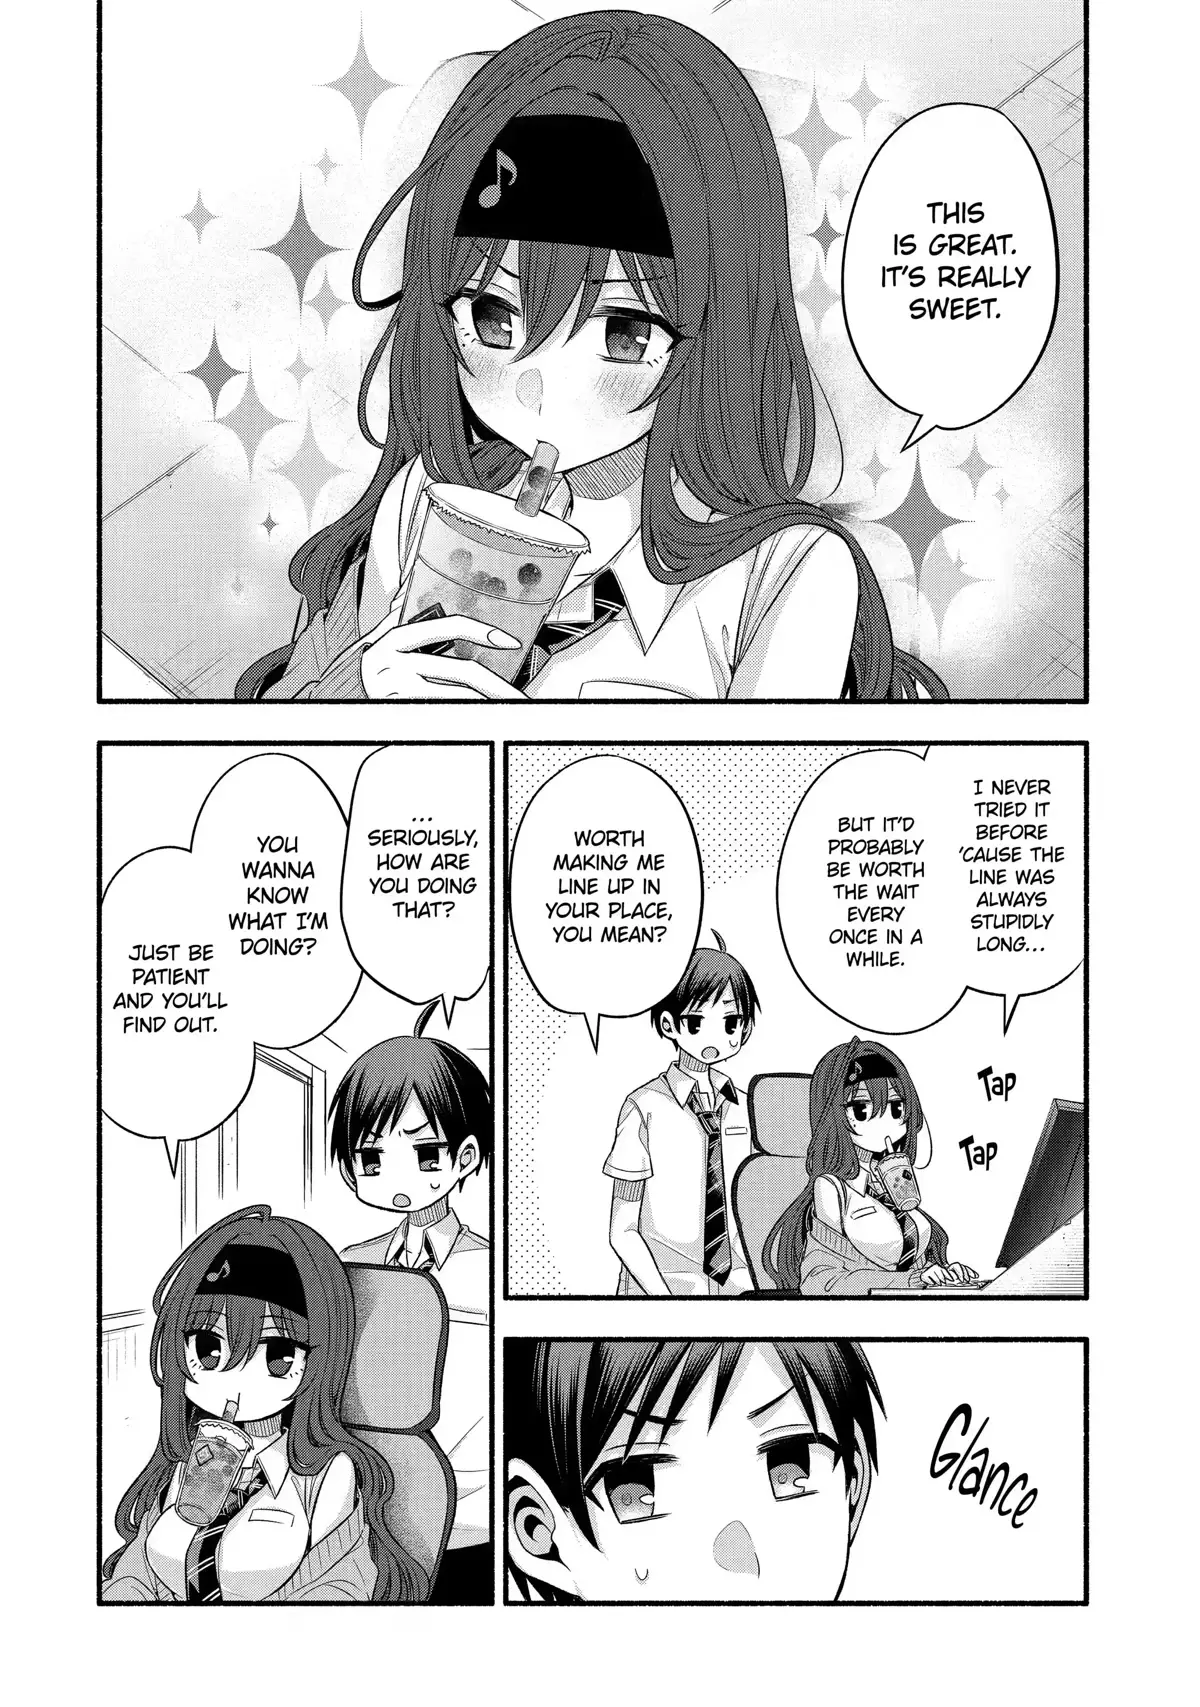 My Friend's Little Sister Is Only Annoying To Me - 24 page 28-0c6ae93c